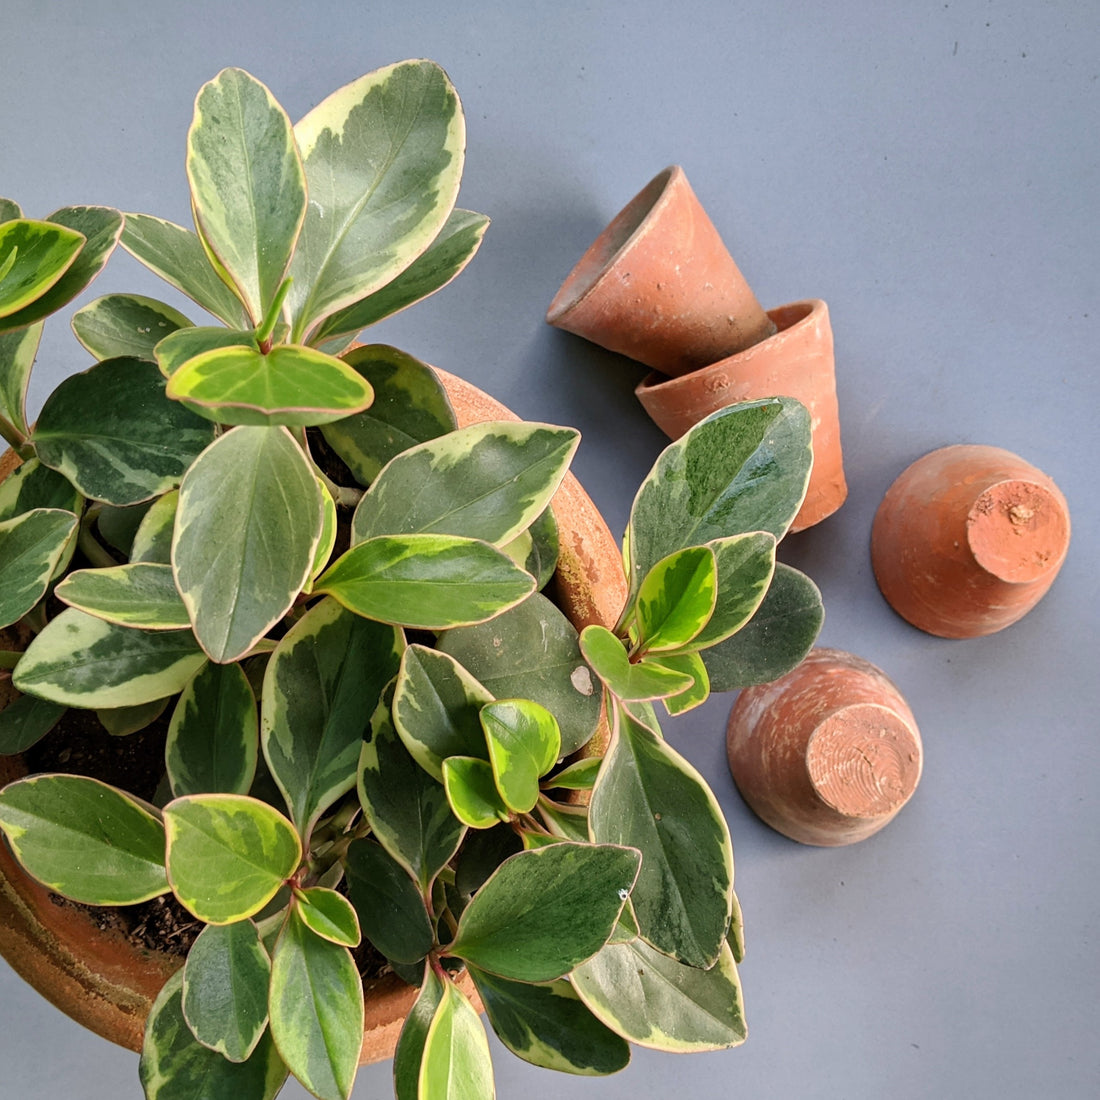 Terracotta Pots can help save your plants. terracotta pots are perfect pots for plants. pros and cons of terracotta pots